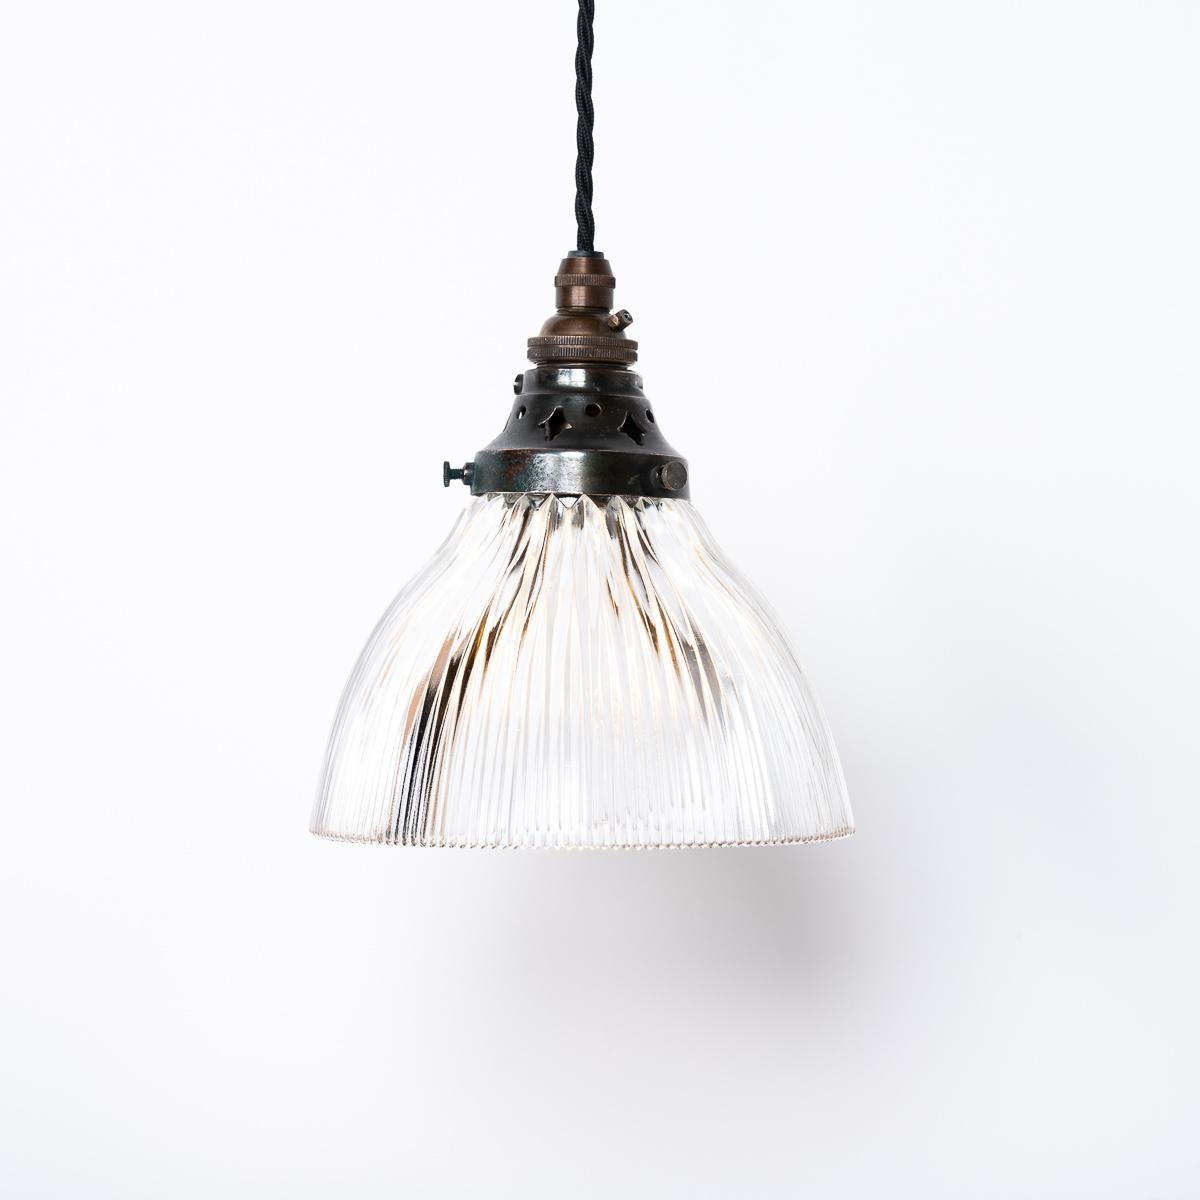 ANTIQUE SMALL HOLOPHANE PRISMATIC GLASS PENDANT LIGHTS
PRICE IS PER LIGHT

An attractive run of small antique Holophane prismatic glass light with original aged brass fittings.

Stamped Holophane galleries and rare blue prismatic glass shades also